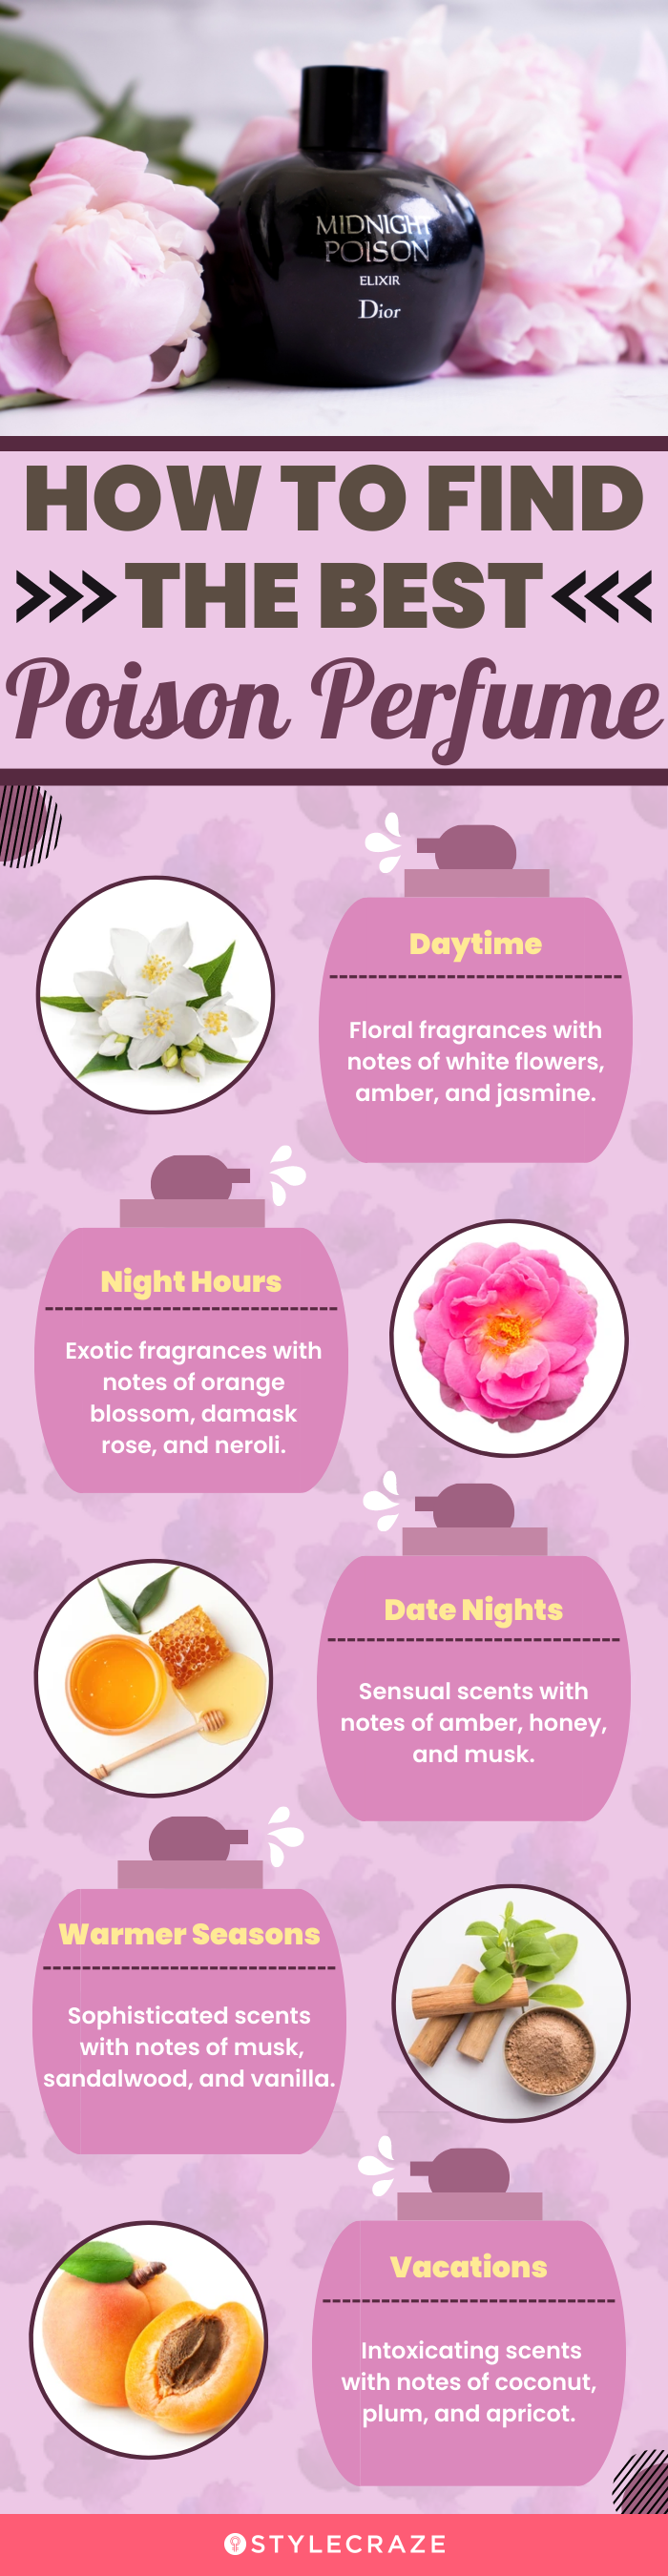 How To Find The Best Poison Perfume (infographic)